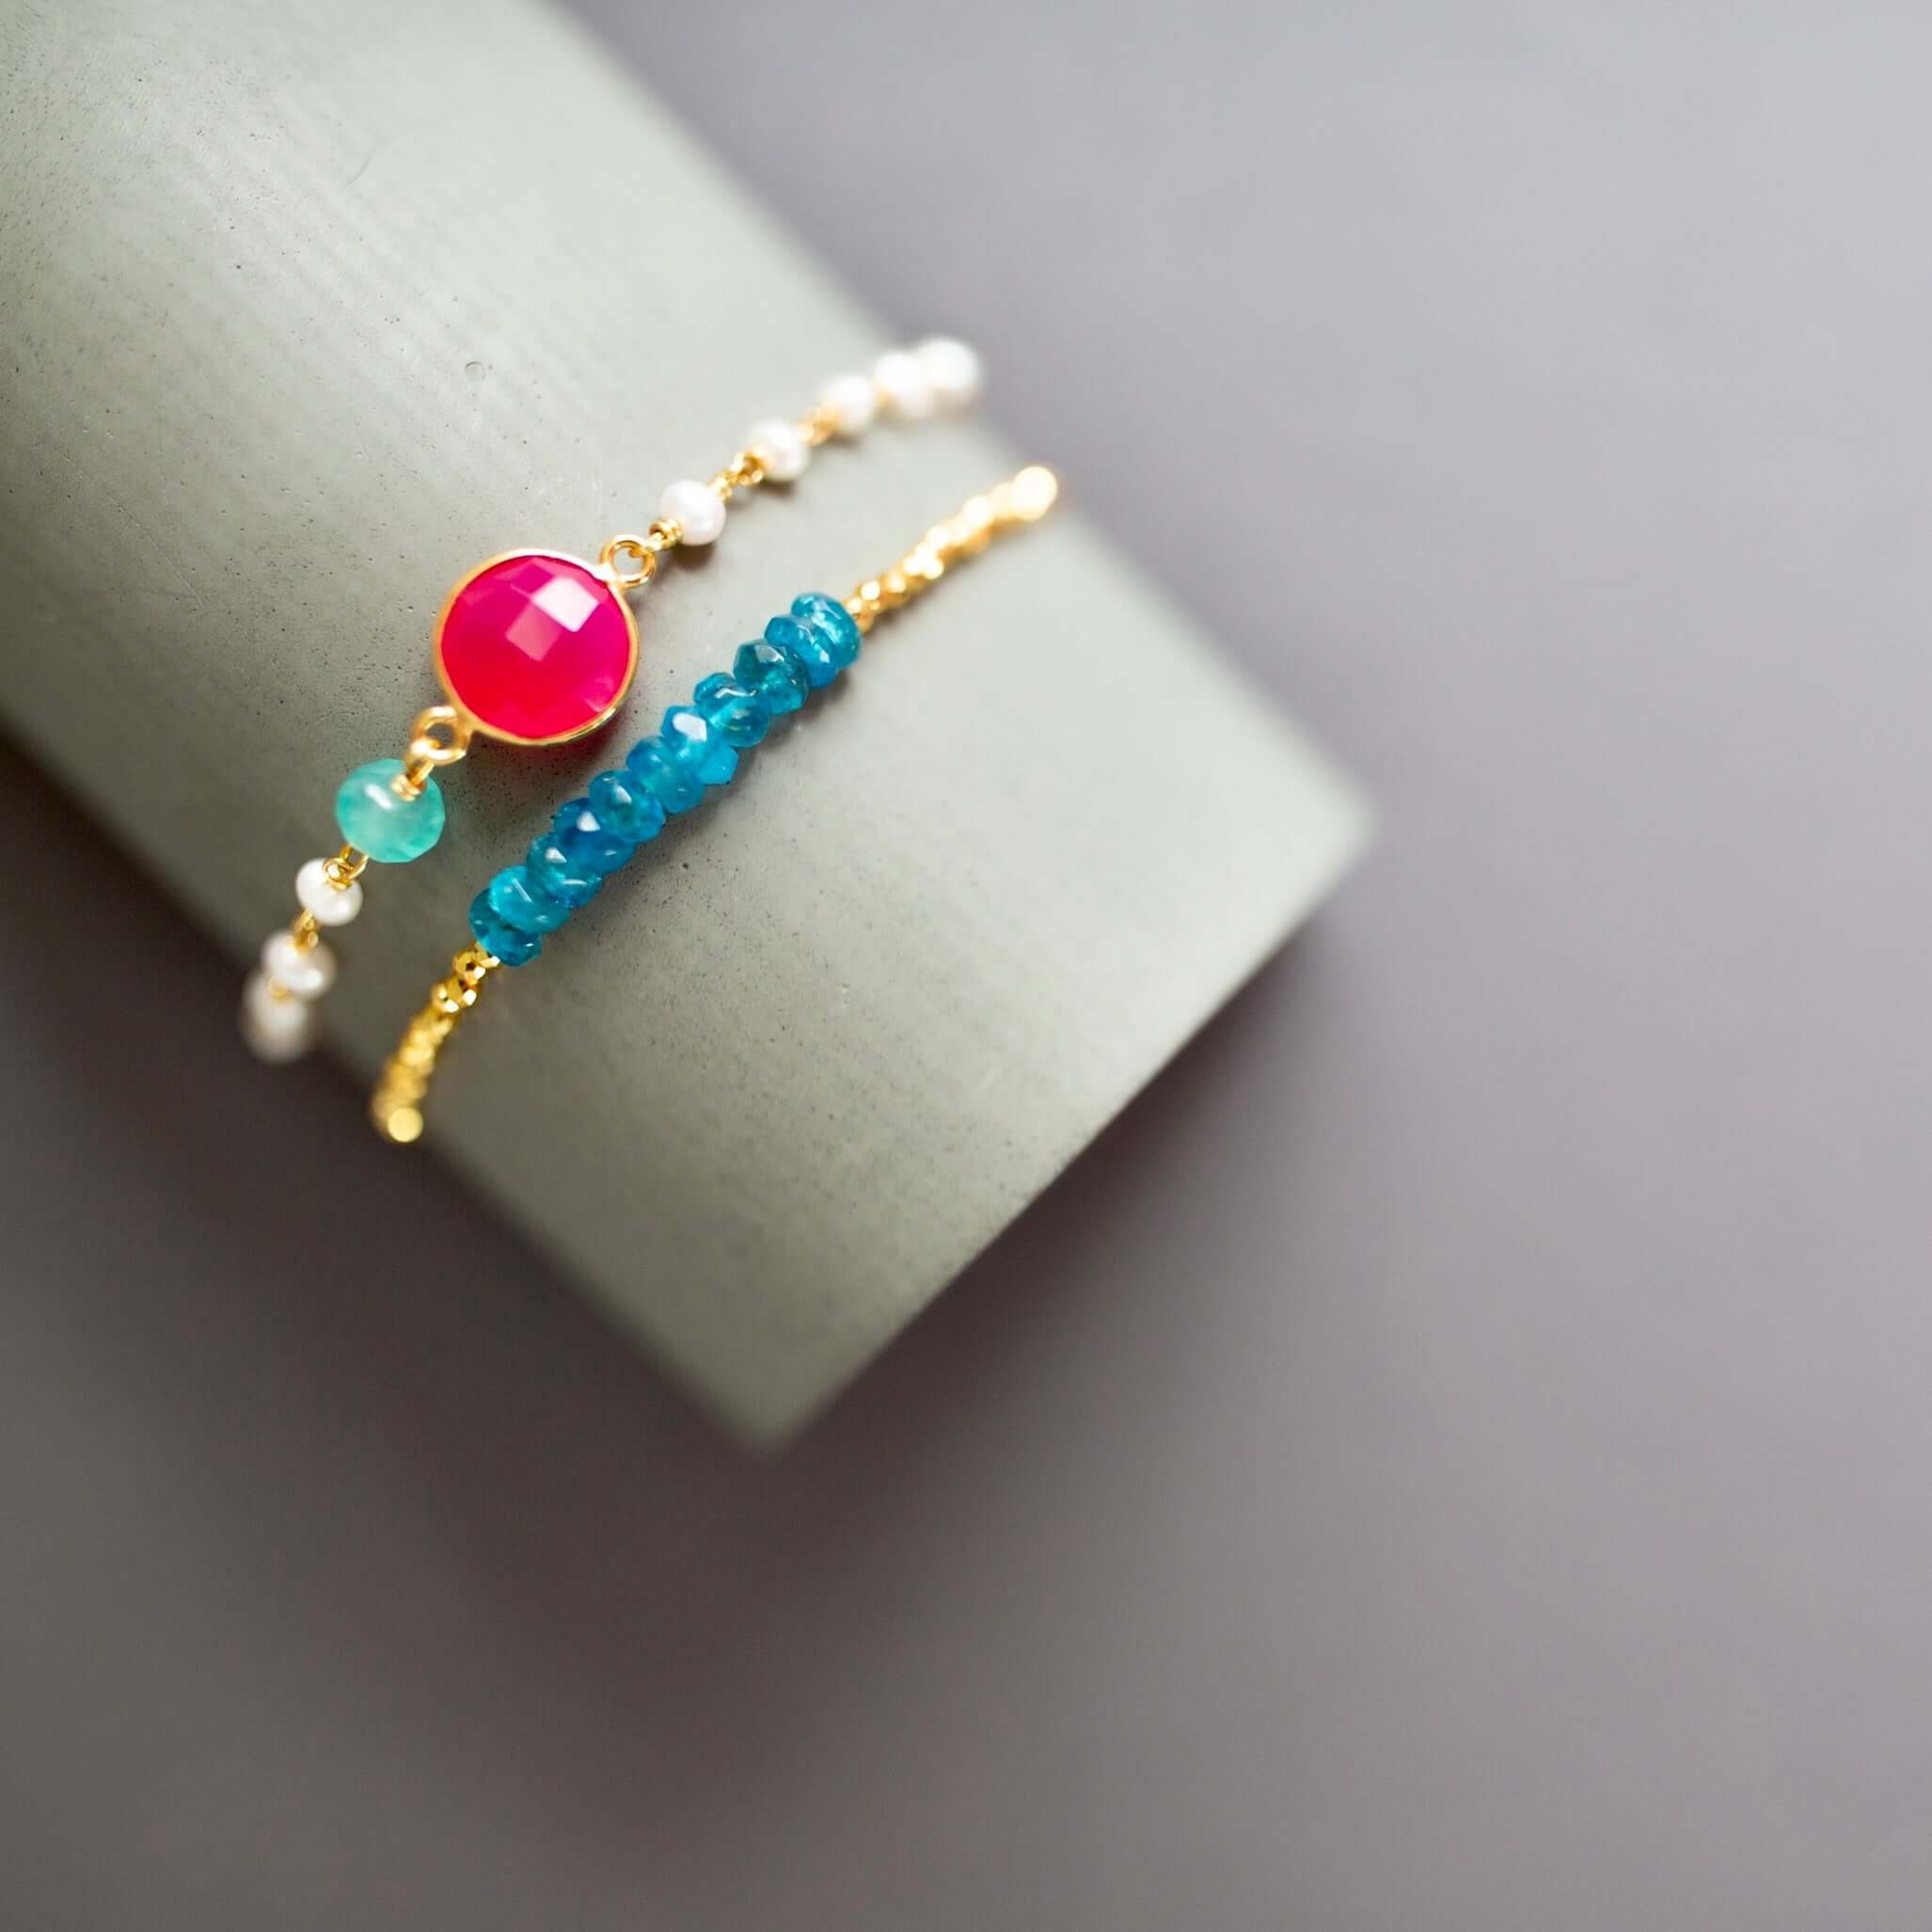  Neon Apatite stone bracelet with  golden pyrite accent beads, adjustable slider clasp, 14k gold plated over Italian silver chain